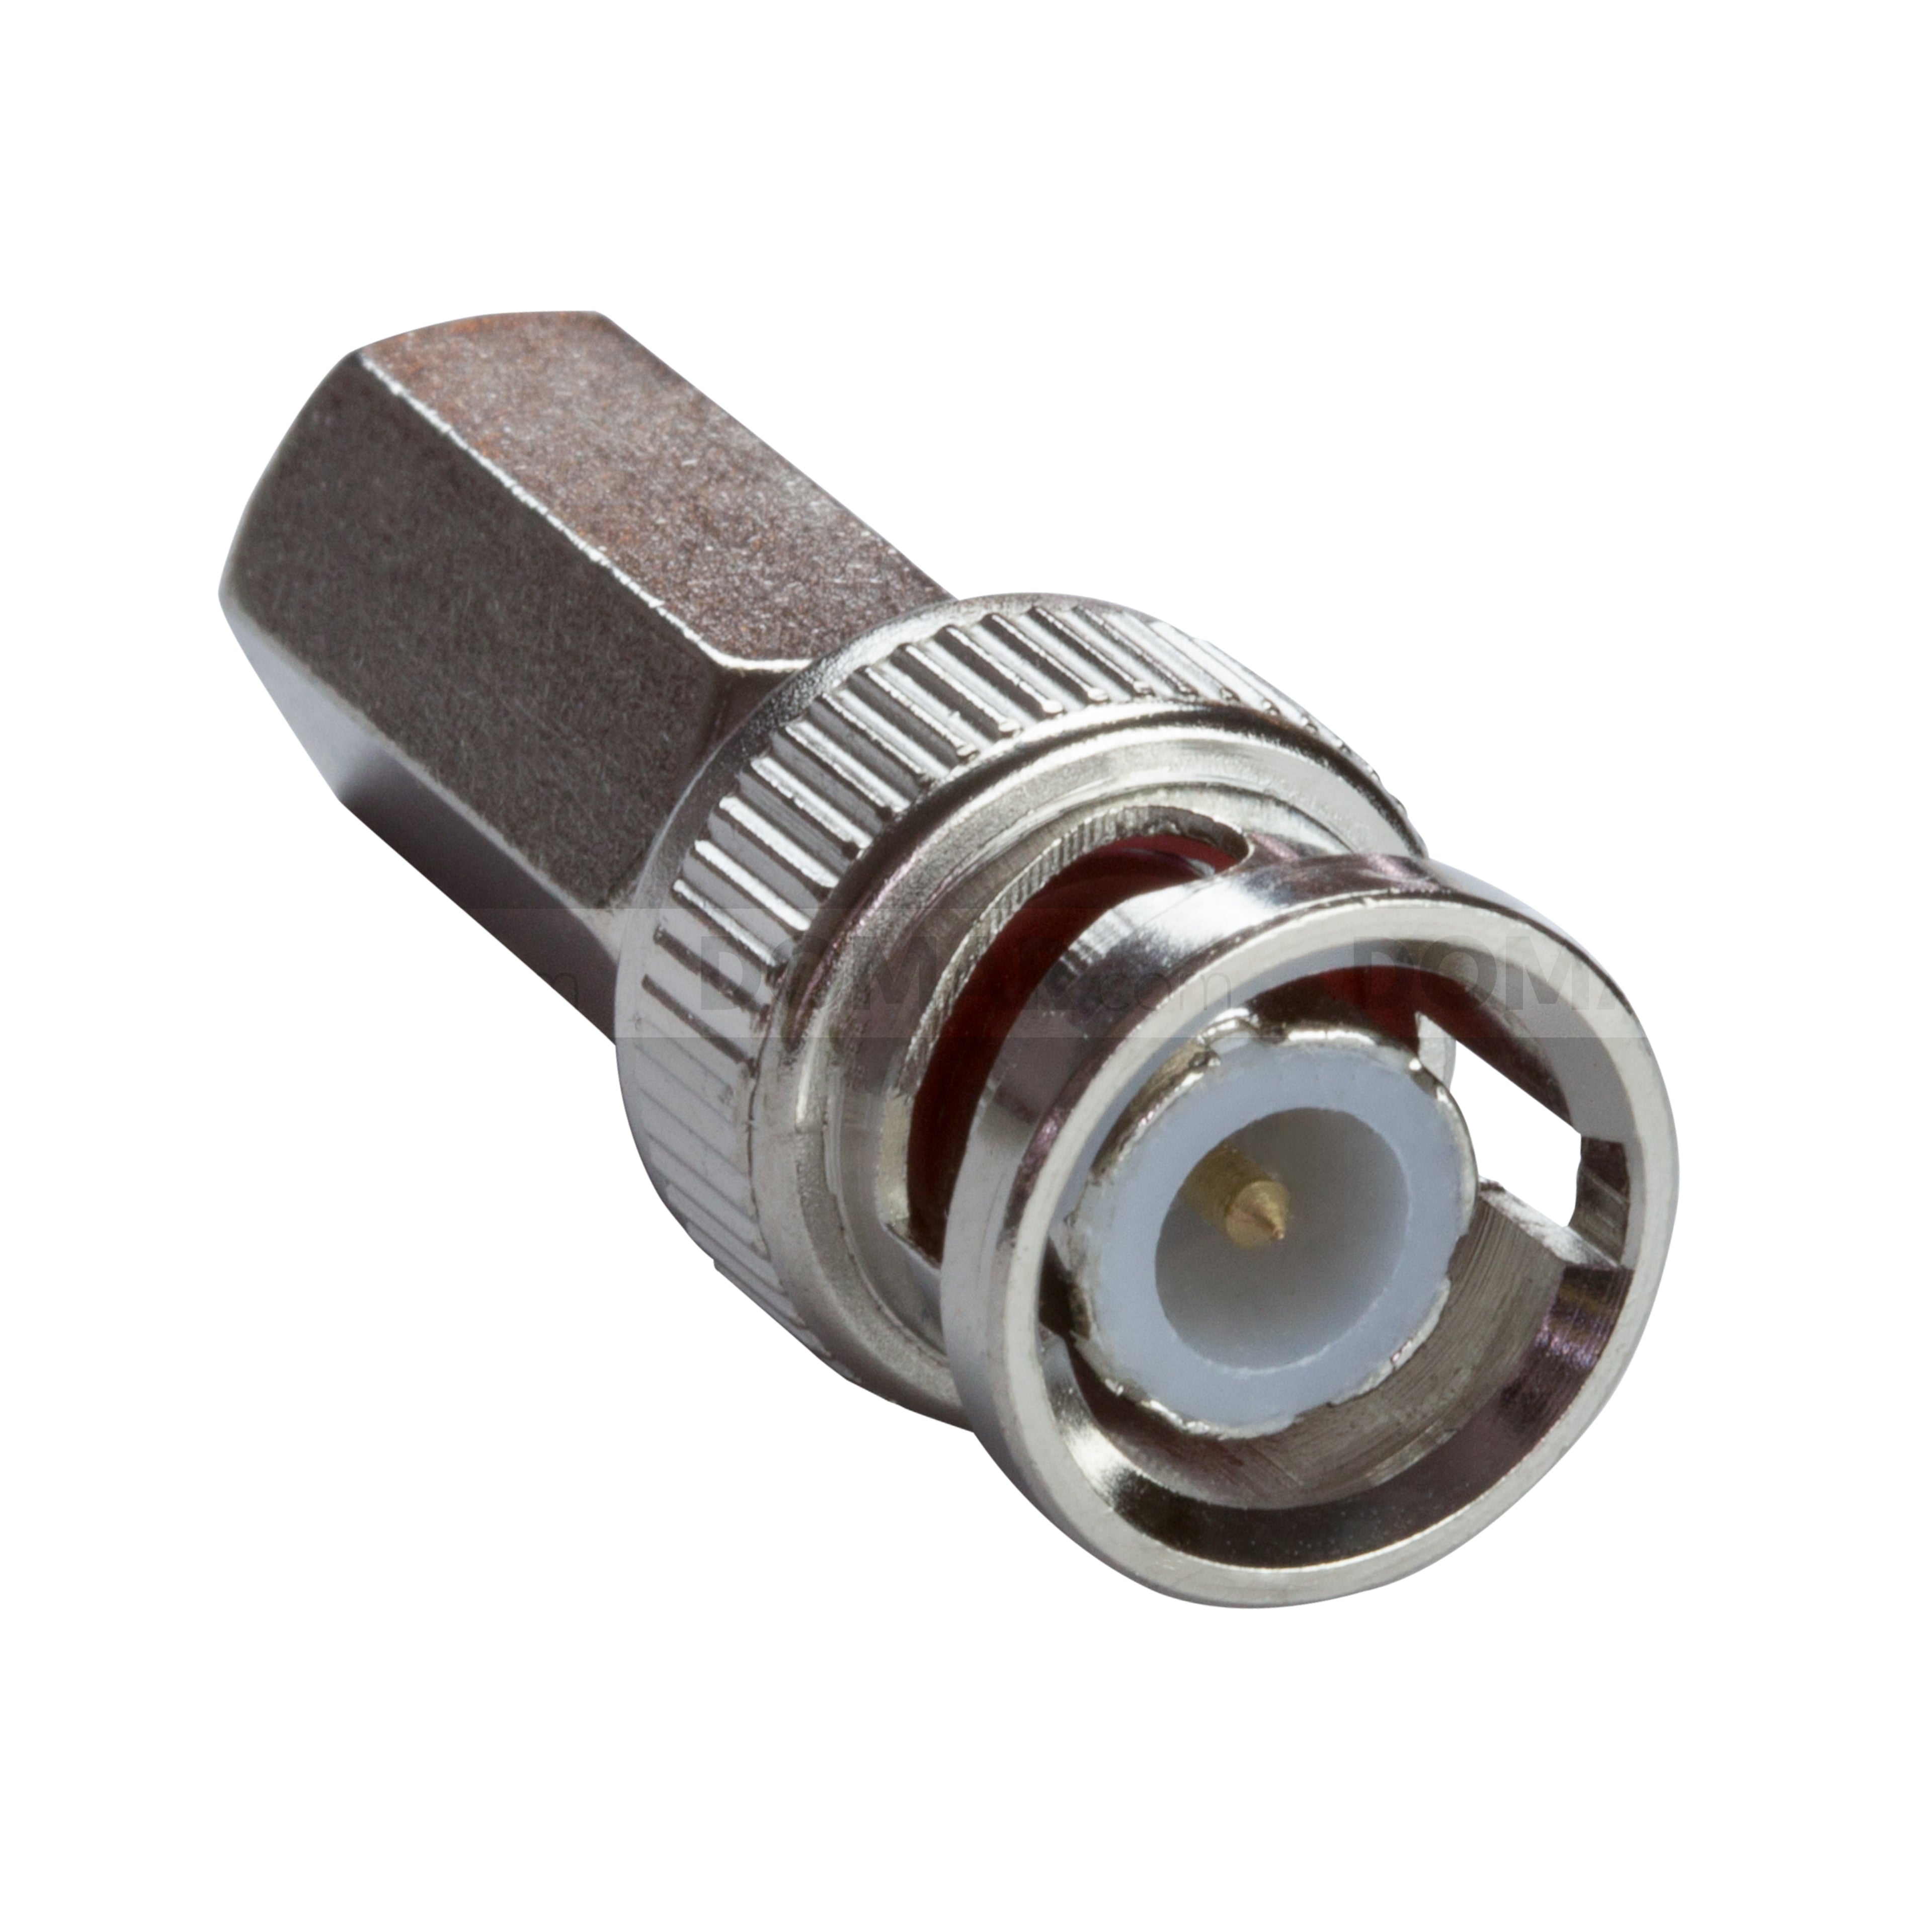 2 Pack of BNC Male Twist On Connector